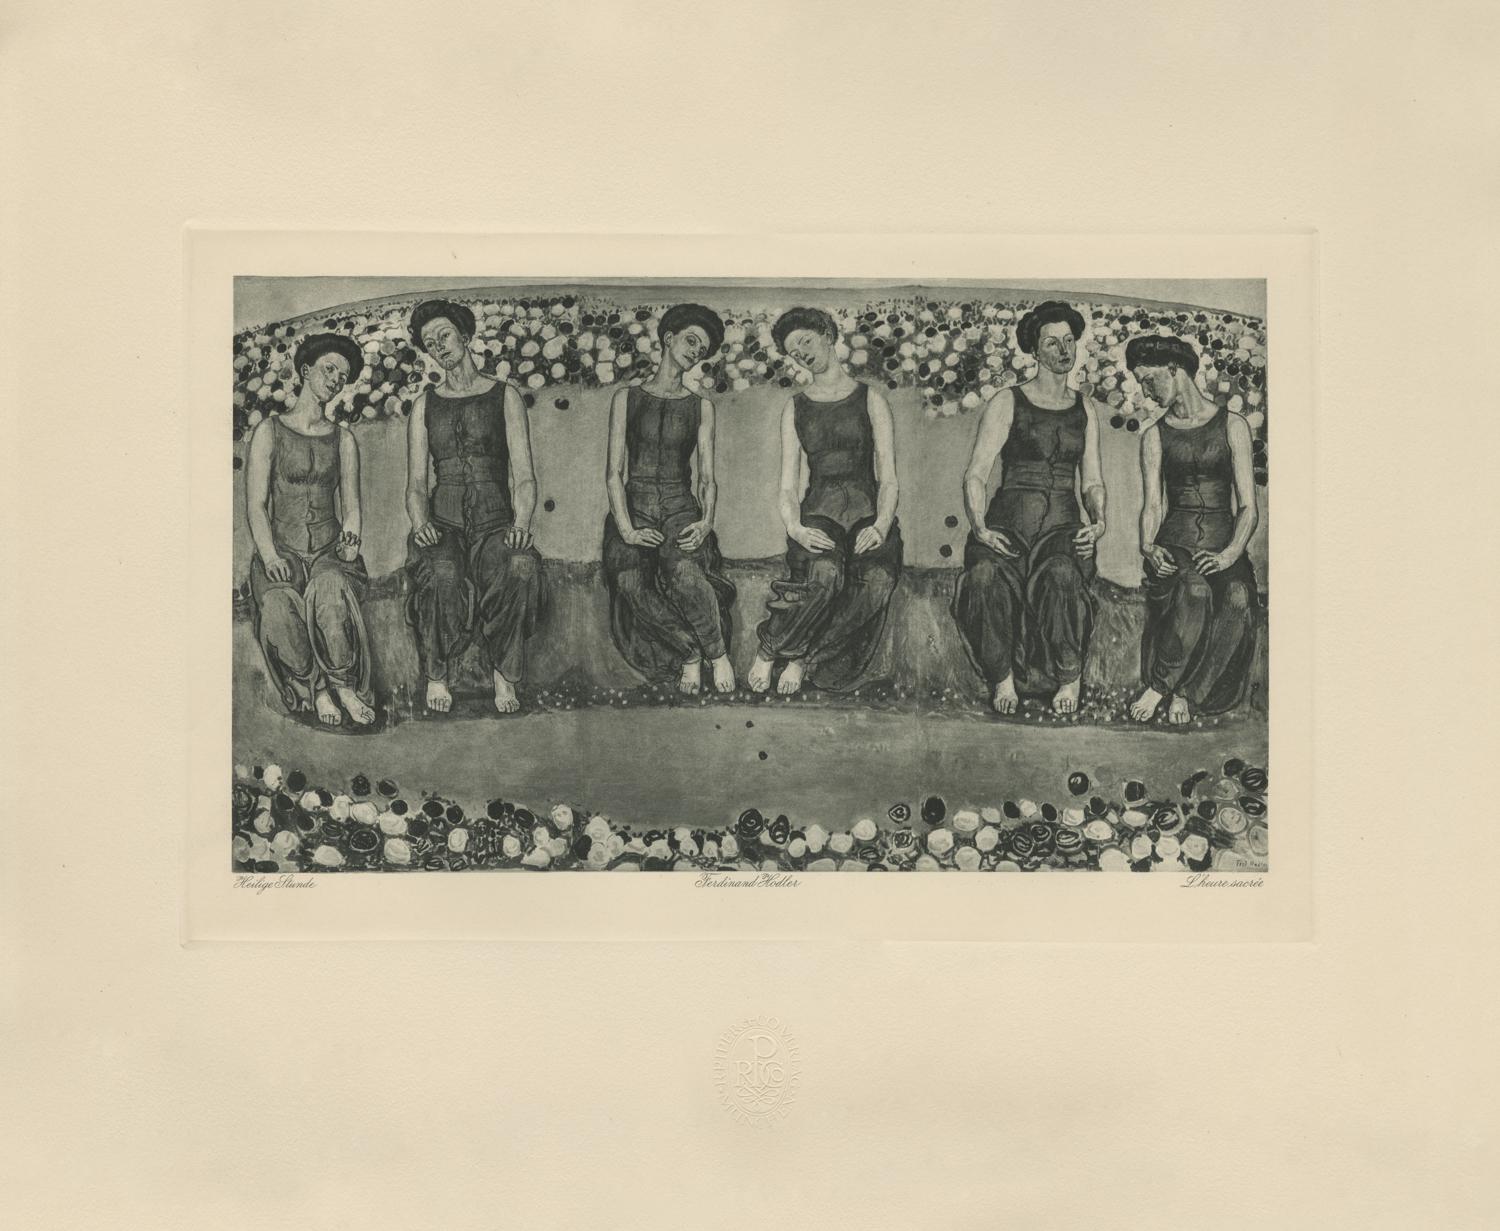 Ferdinand Hodler & R. Piper & Co. Figurative Print - "The Holy Hour with Six Figures" Copper Plate Heliogravure